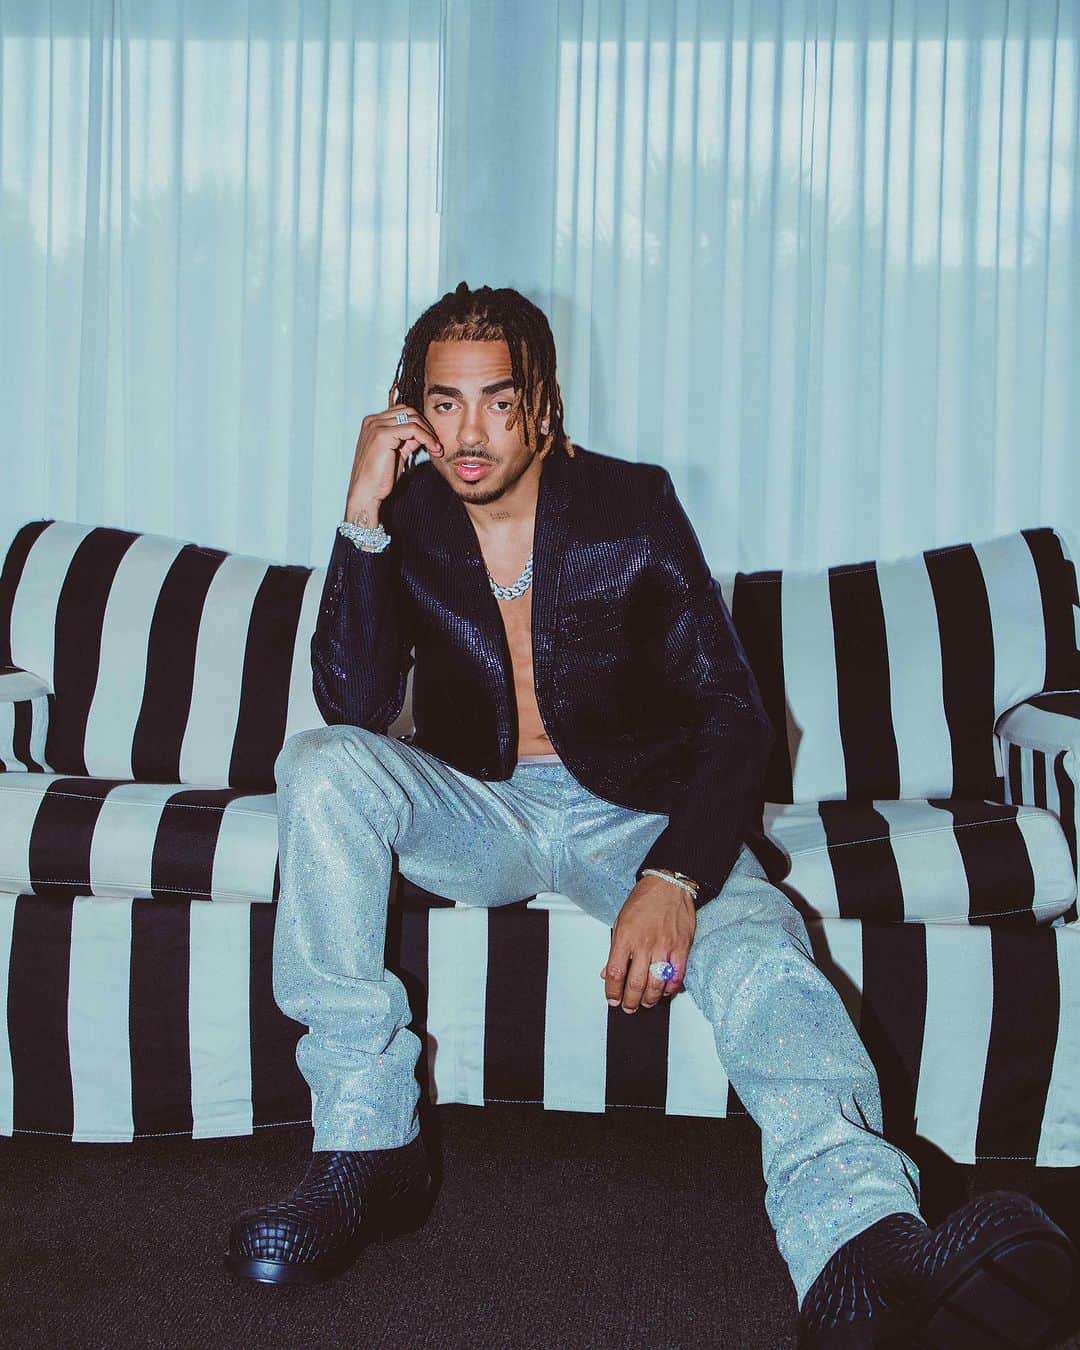 Flaunt Magazineのインスタグラム：「@Ozuna for The 25th Anniversary Issue, Under the Silver Moon!  Puerto Rican singer and rapper Ozuna is the global ambassador of Reggaeton, beginning his career performing in local shows and sharing his music on YouTube. Cut to 2012 and Ozuna’s song “Imaginando,” garnered attention from labels, and he would soon top @LatinBillboards charts.   In 2023 alone Ozuna has 15 songs in collaboration with other artists. On the art of working with other musicians, he says, “I love being able to bounce ideas off of my collaborators–all of my collaborations on this new record are really unique. I think that these songs definitely improve with including other artists because they bring a fresh perspective and allow me to expand my sound.”  Read the full feature on flaunt.com!  Ozuna wears @Dior blazer and pants, #BottegaVeneta shoes, @The24k & El Russo x AviandCo necklace, bracelet, and rings.   Photographed by @Kevin_Amato Styled by @Everybodys.Favorite.Nobody Written by @ConstanzaFalcoR Groomer: @FrancesNievesPR Flaunt Film: @Uhhvonte Location: @SLSSouthBeach   #FlauntMagazine #UnderTheSilverMoon #Ozuna #Cosmo」